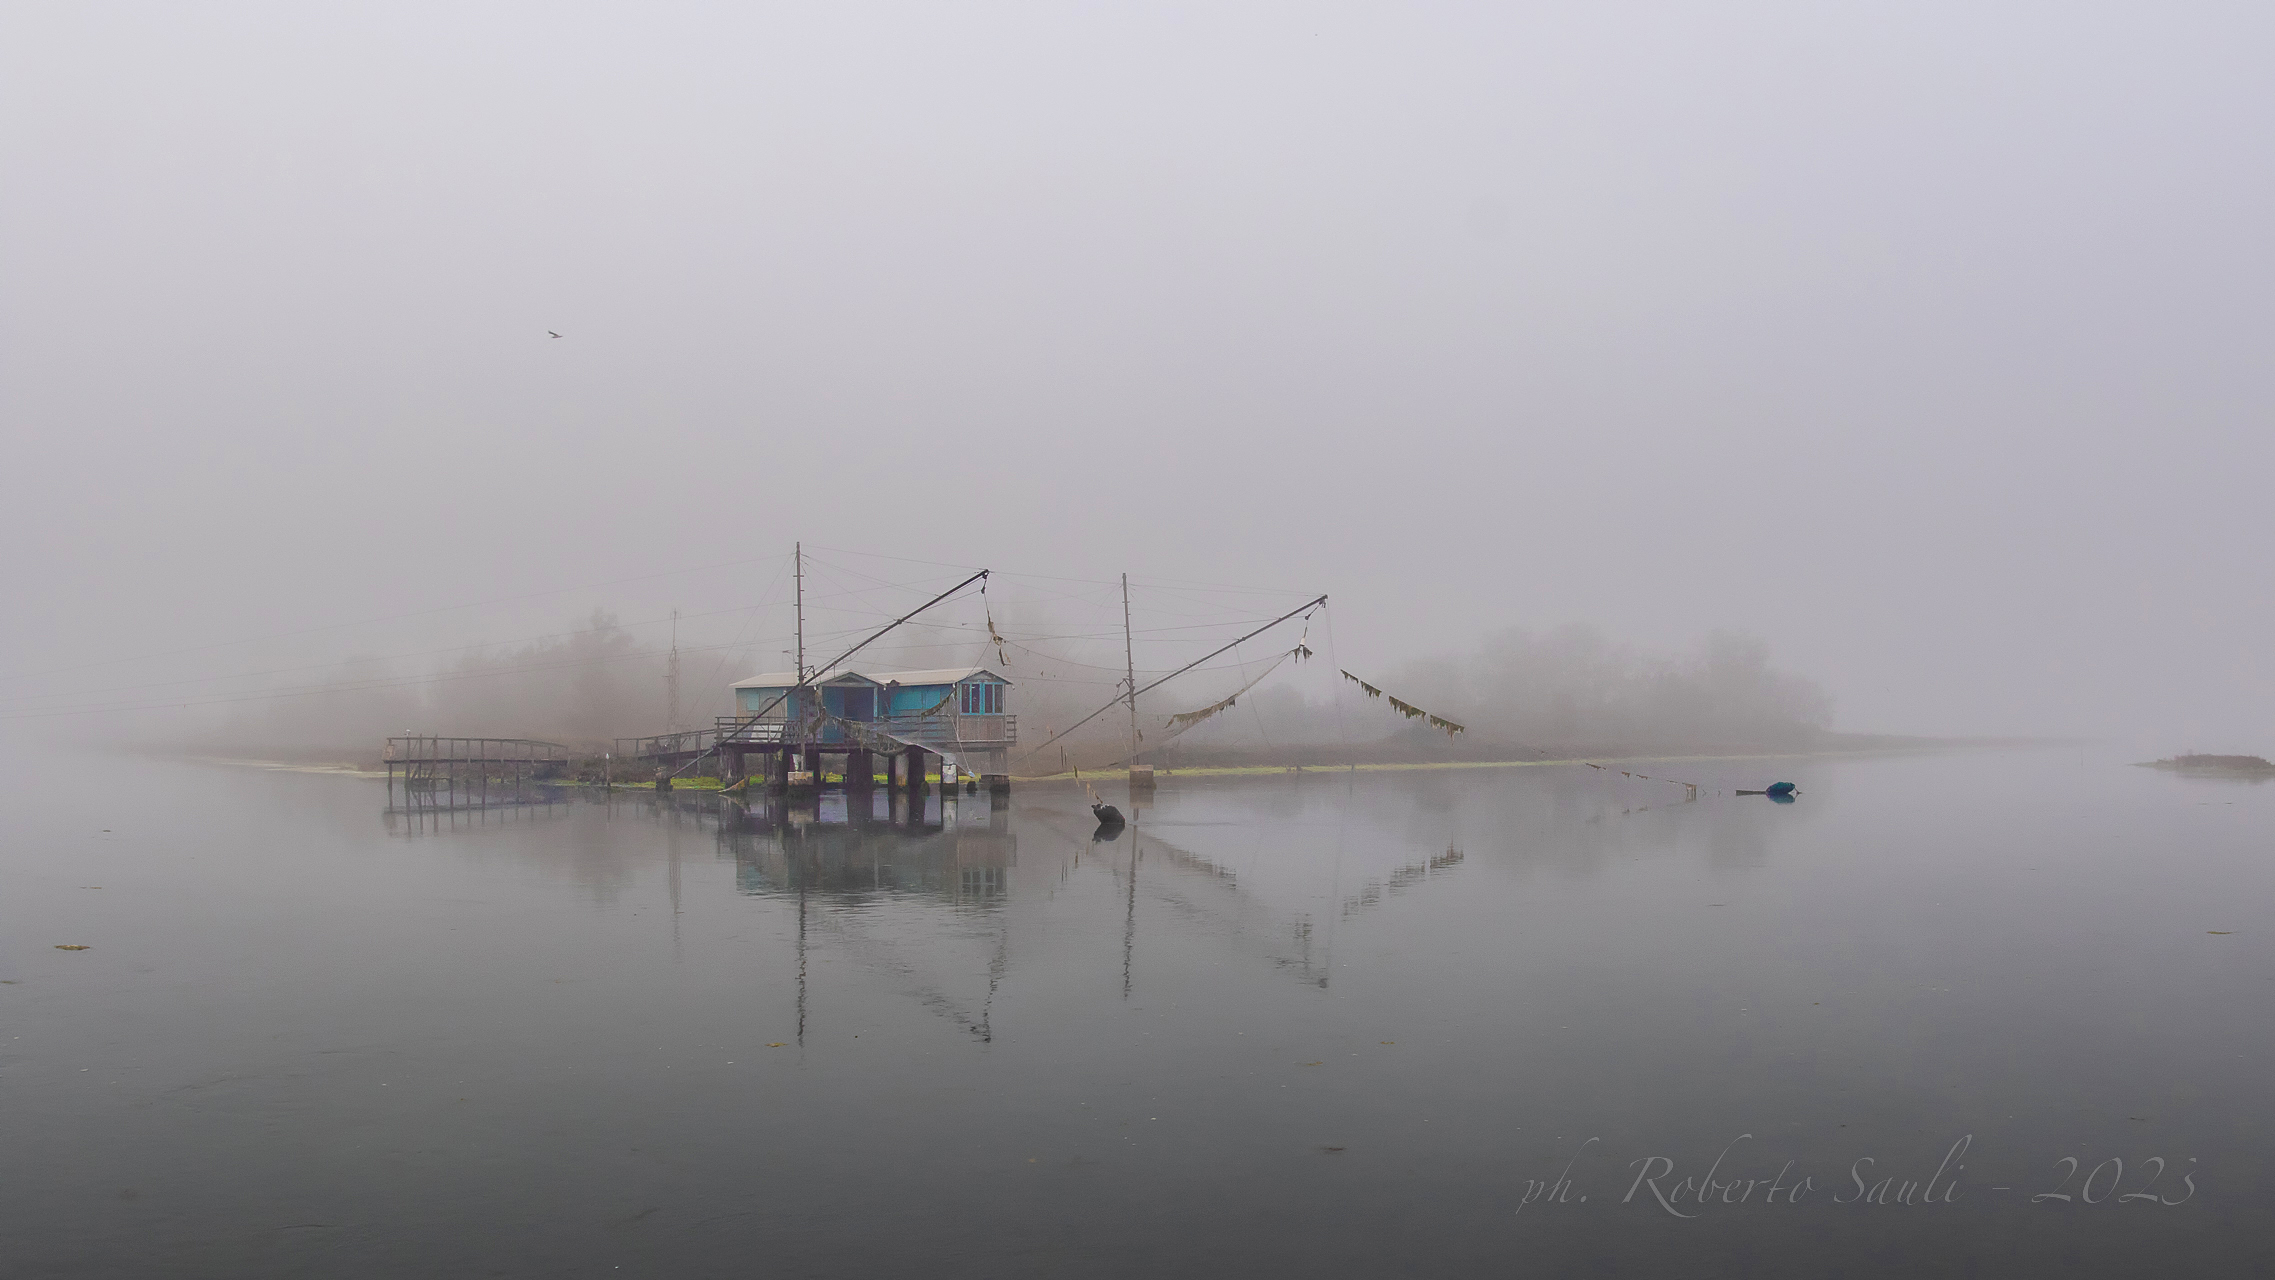 The "frying pan" in the fog...